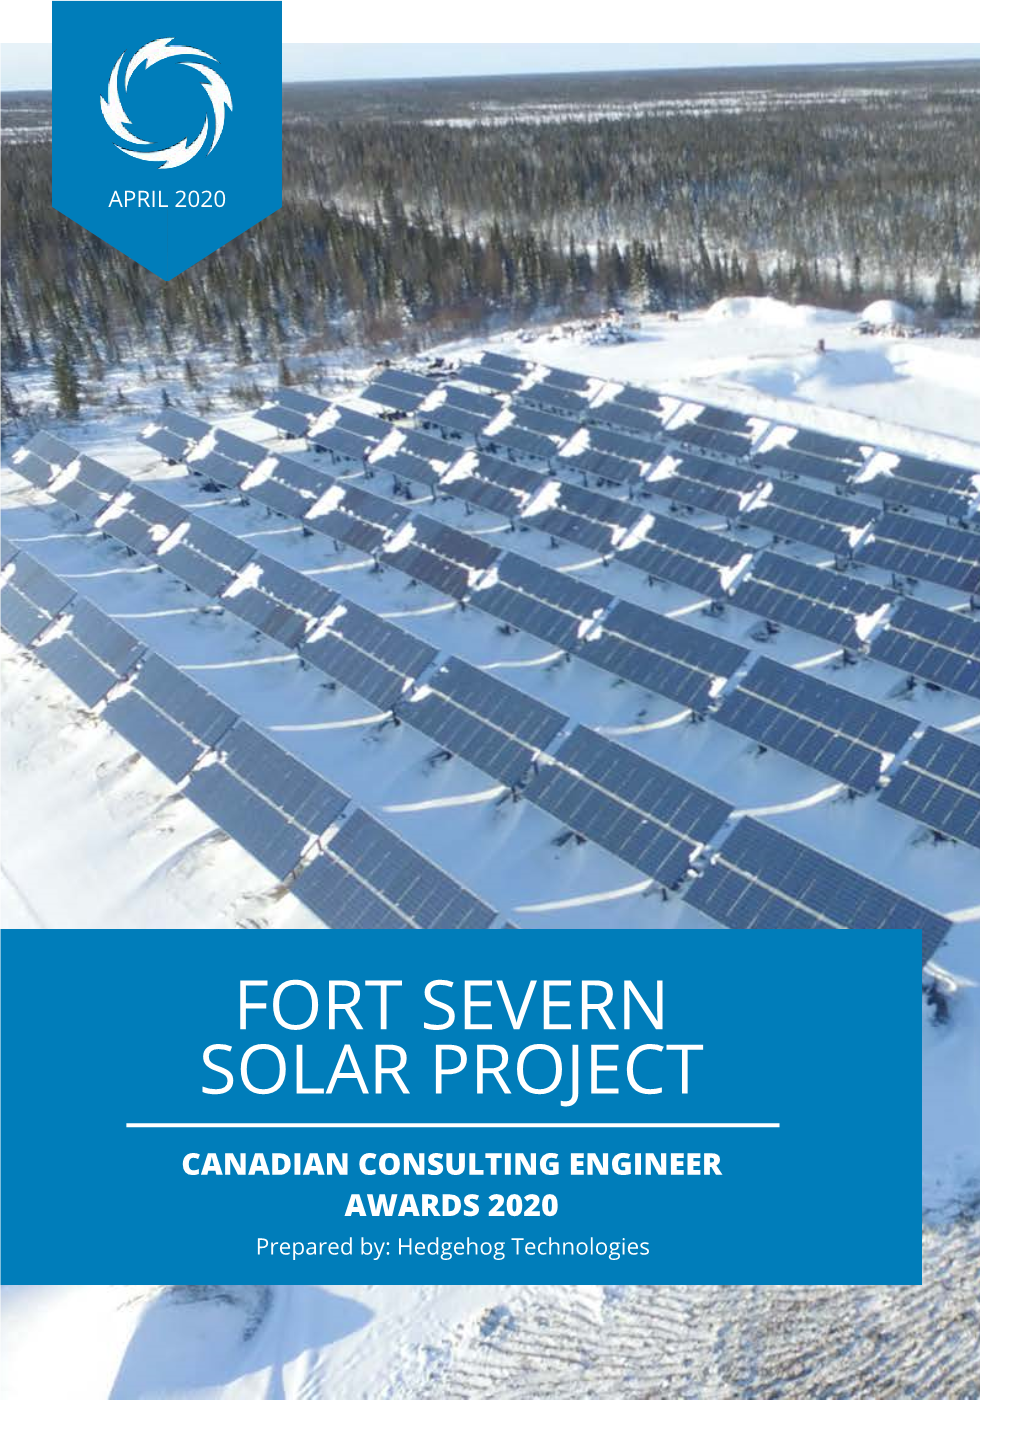 Fort Severn Solar Project